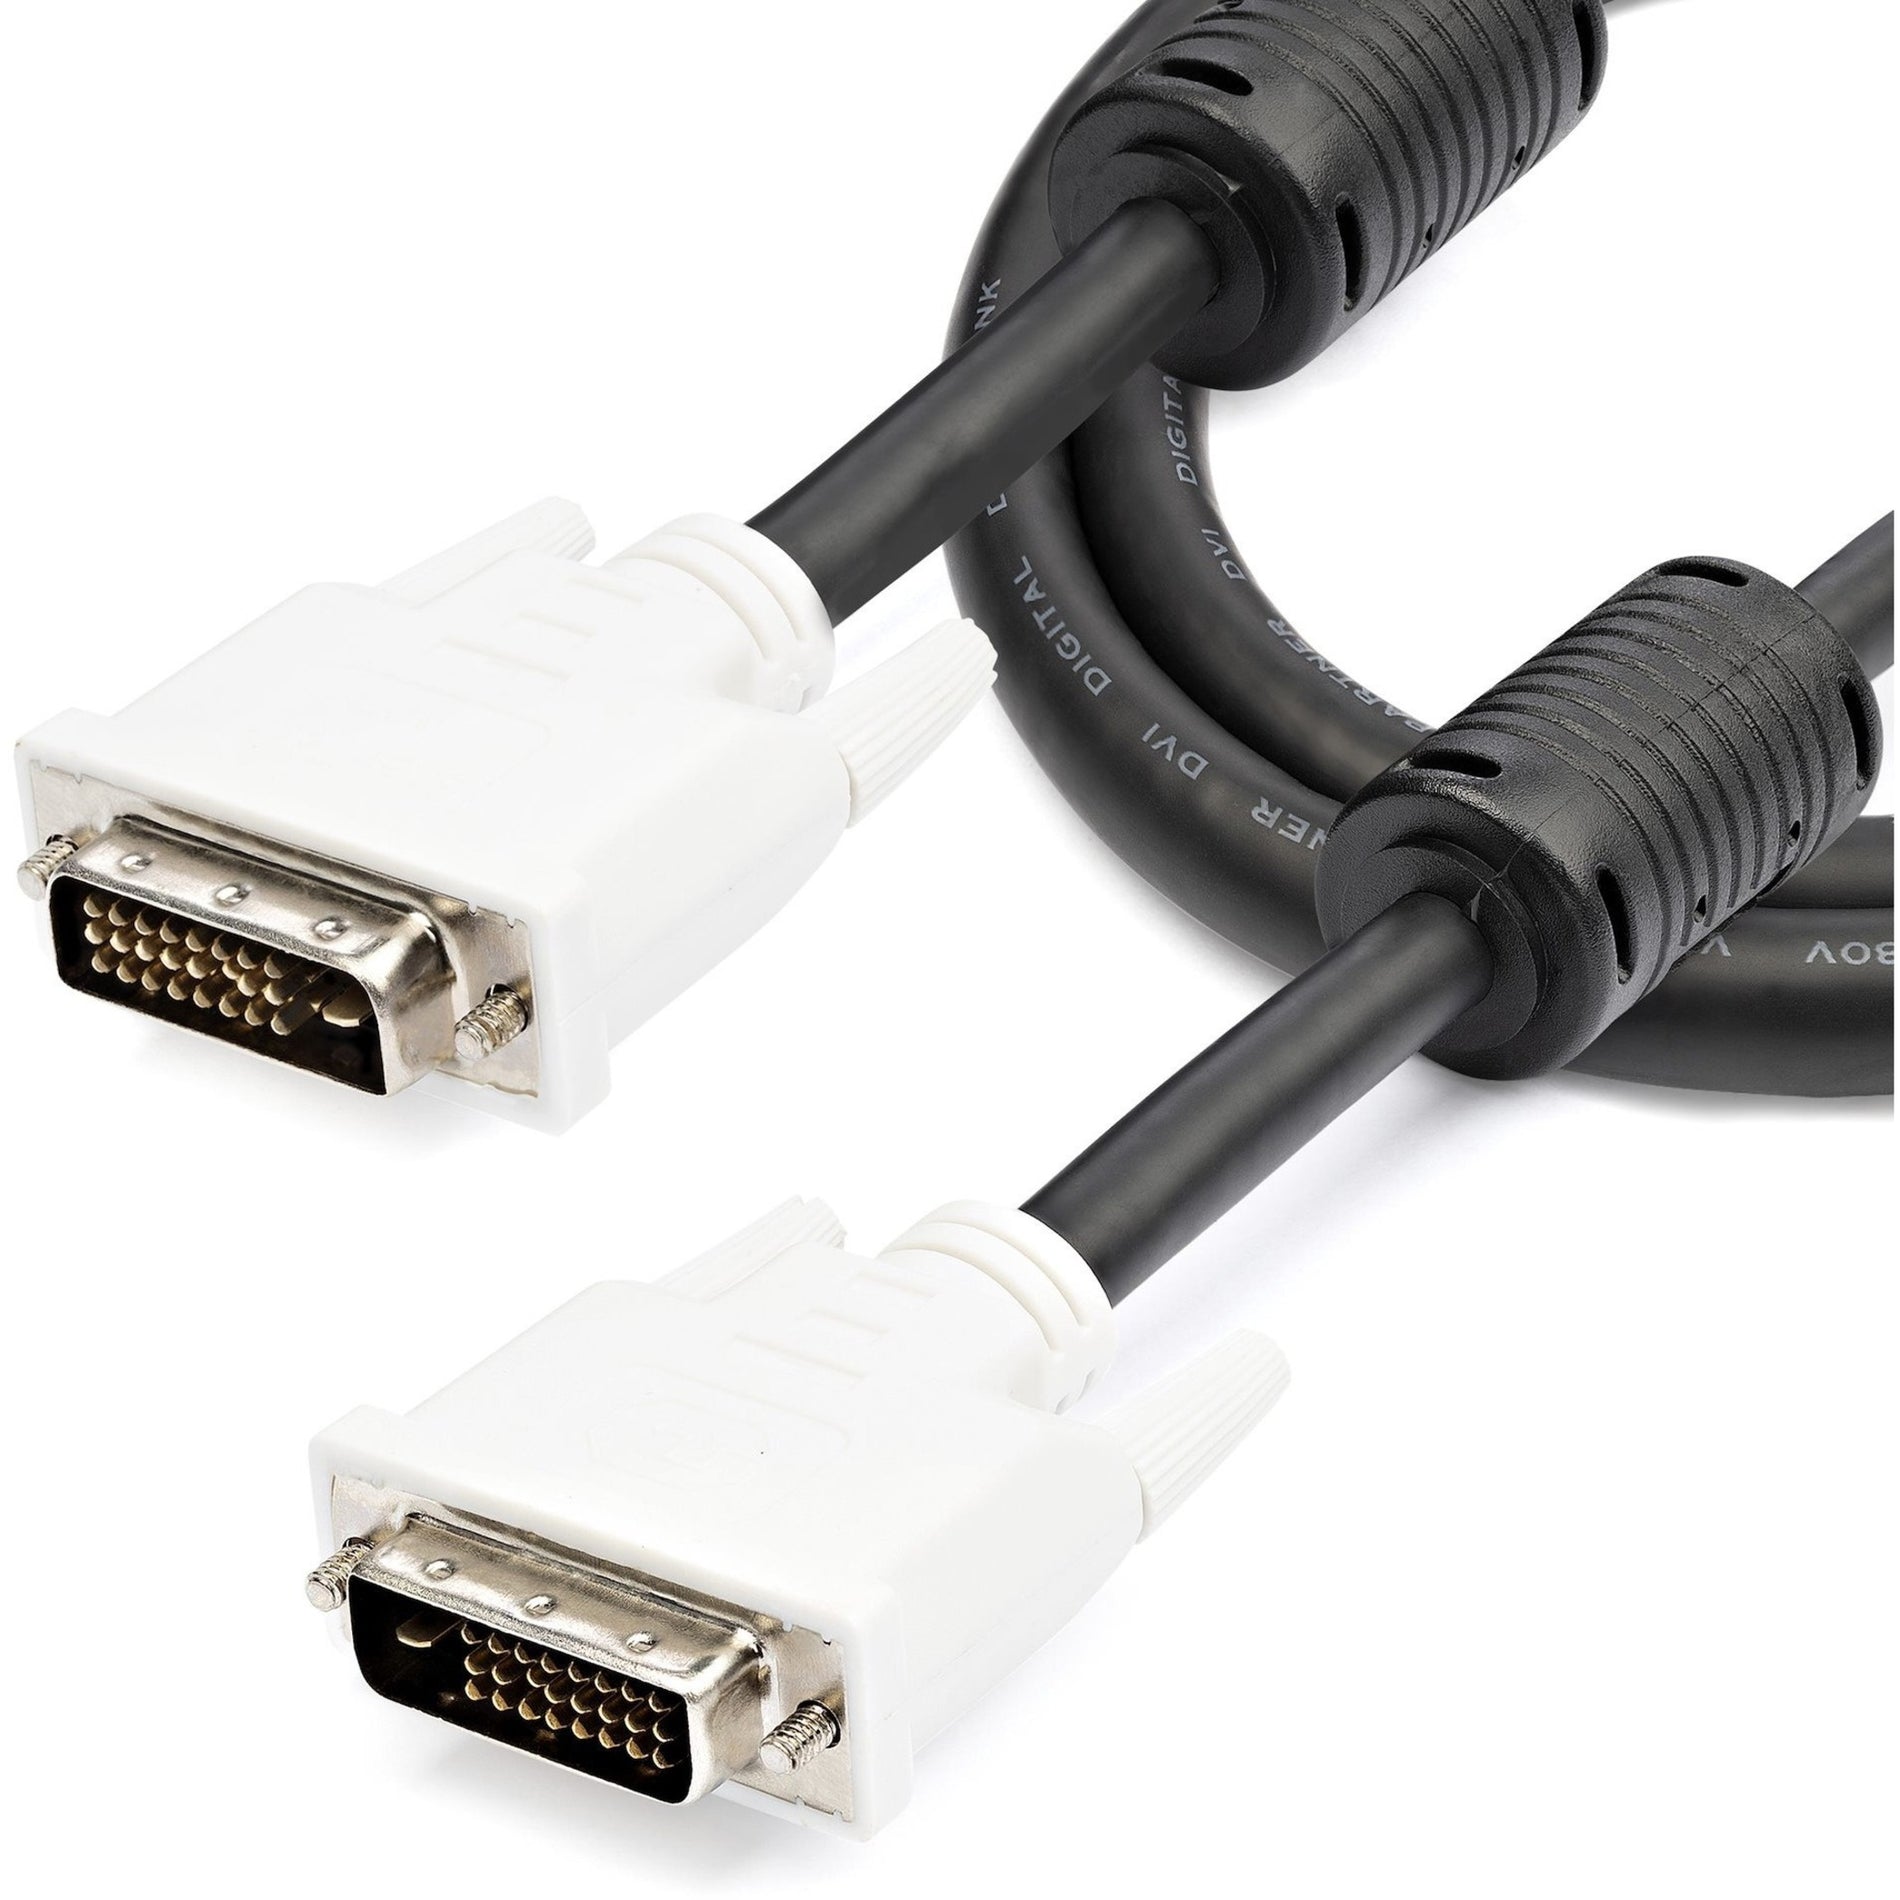 StarTech.com DVIDDMM3 3 ft DVI-D Dual Link Cable - M/M, High-Speed Video Cable for Notebooks, Monitors, and More